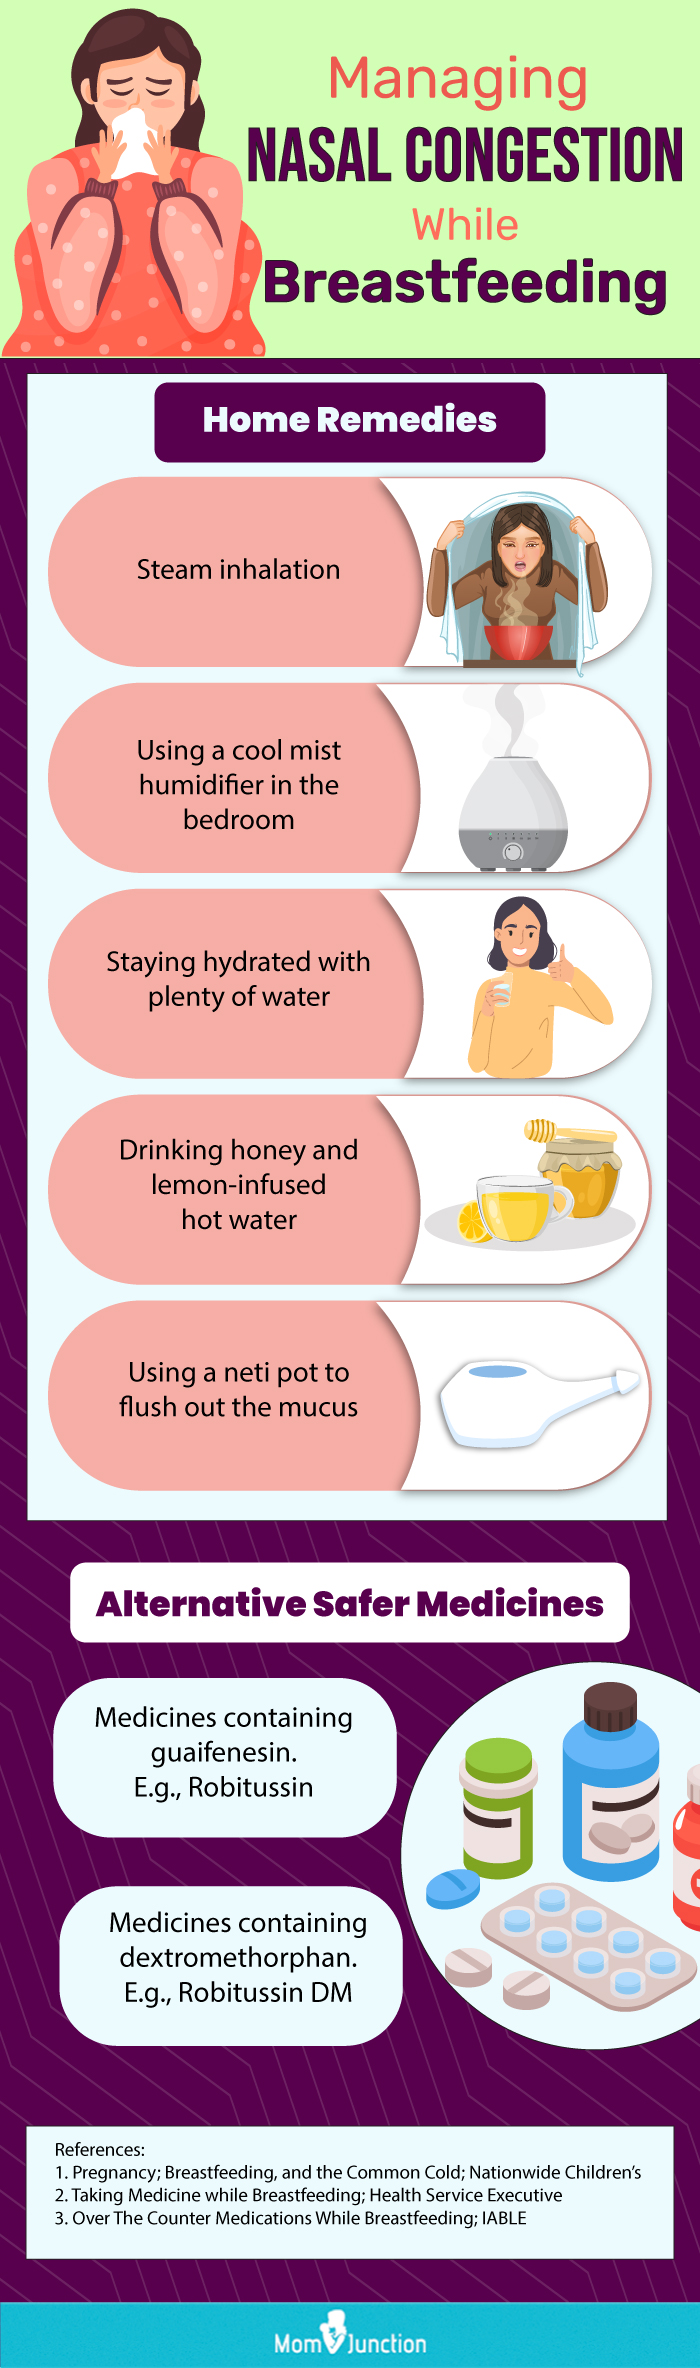 nasal congestion while breastfeeding (infographic)